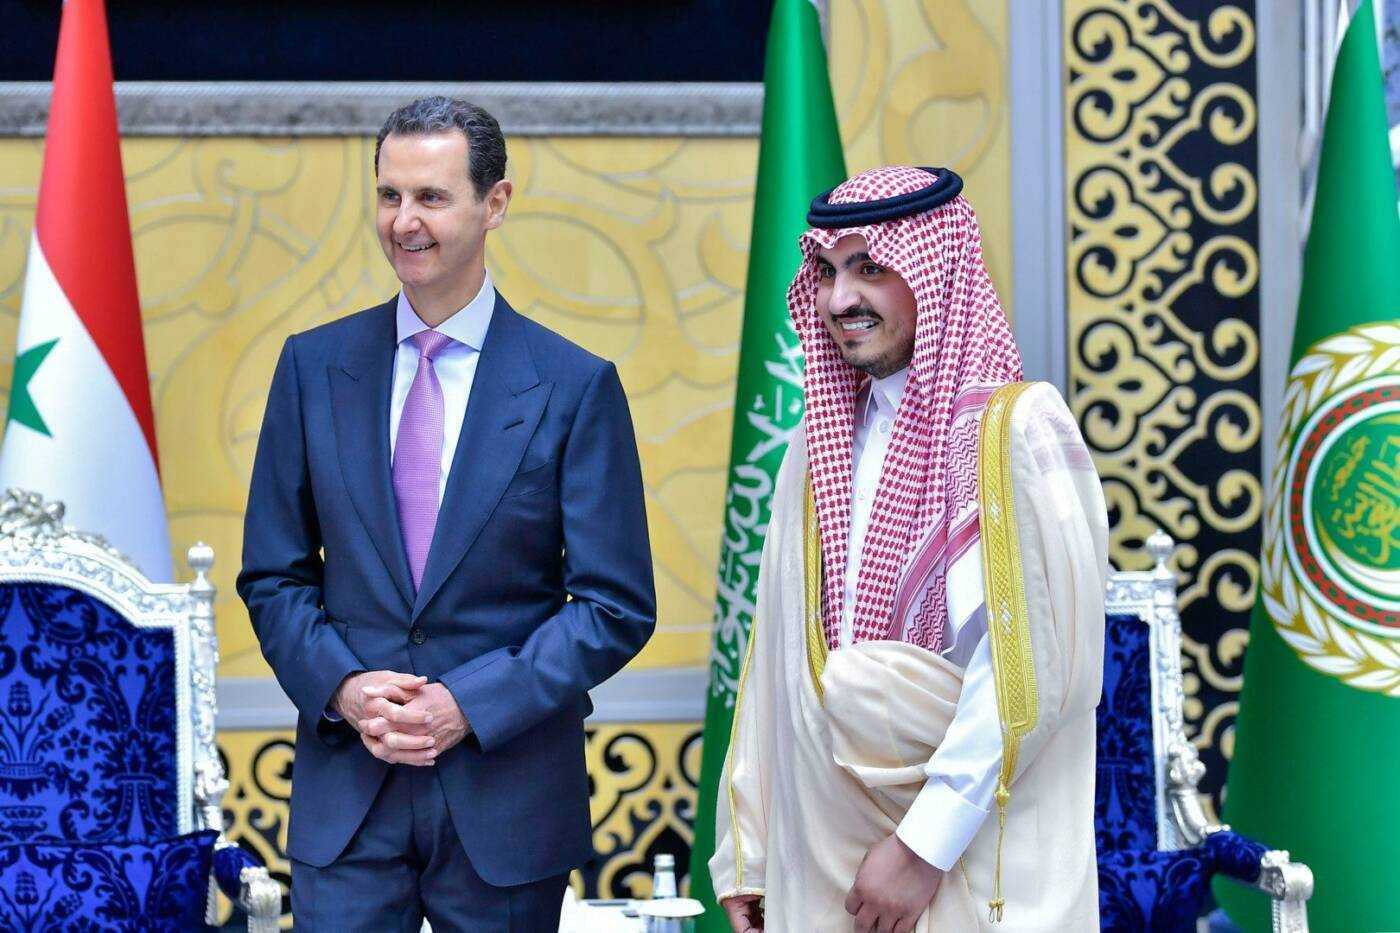 Assad grins at the Arab League summit, and Syrians in exile recoil